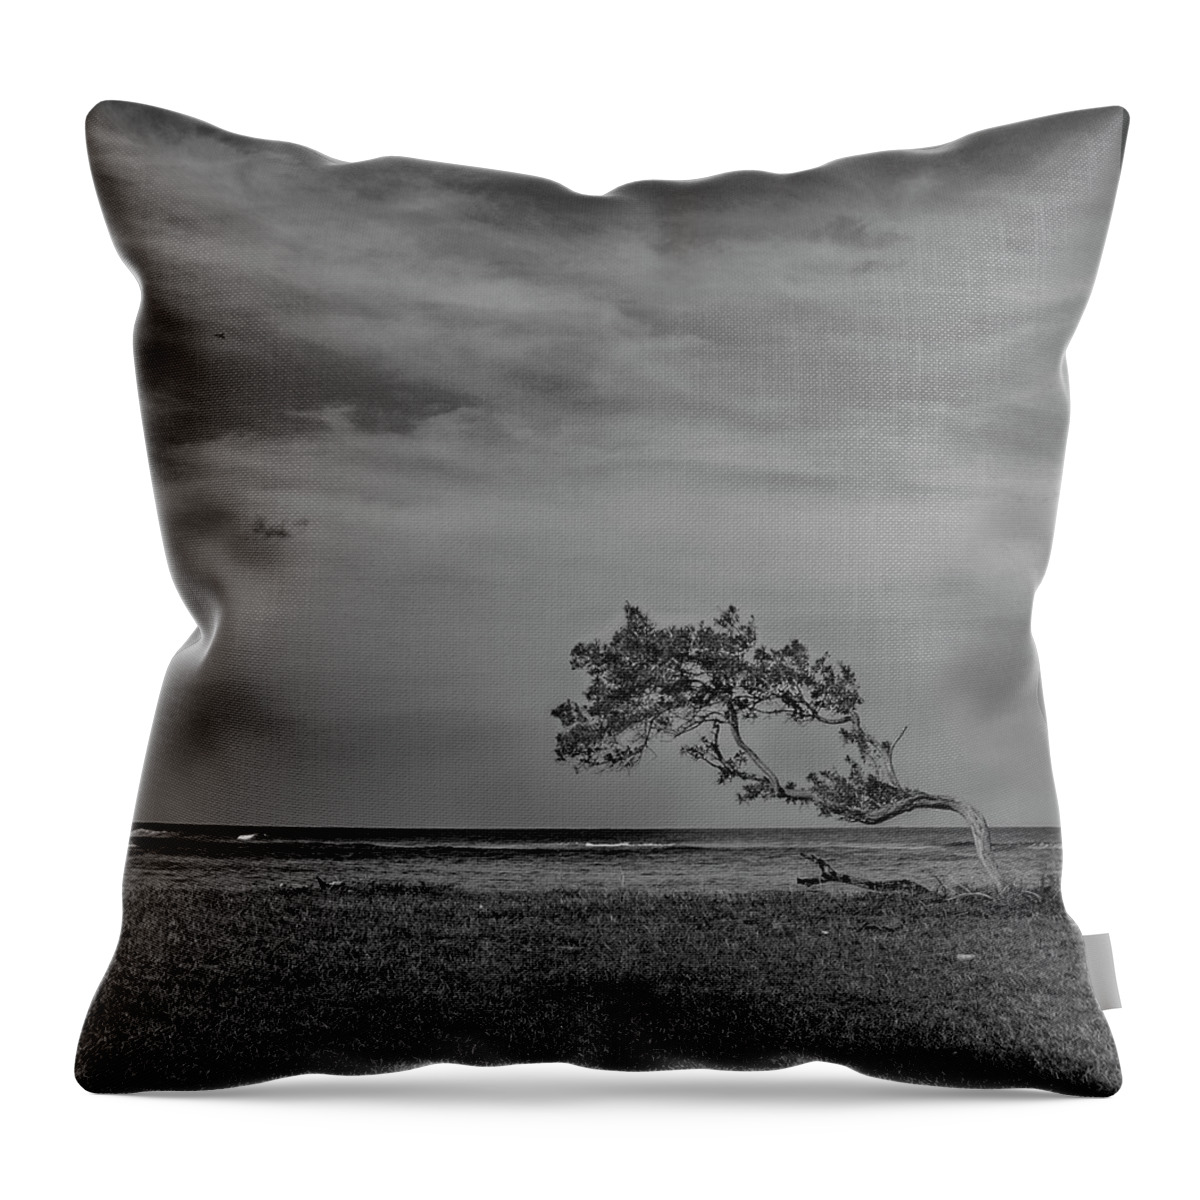 Black And White Throw Pillow featuring the photograph Learning To Fly by Wendy Franco Carballo